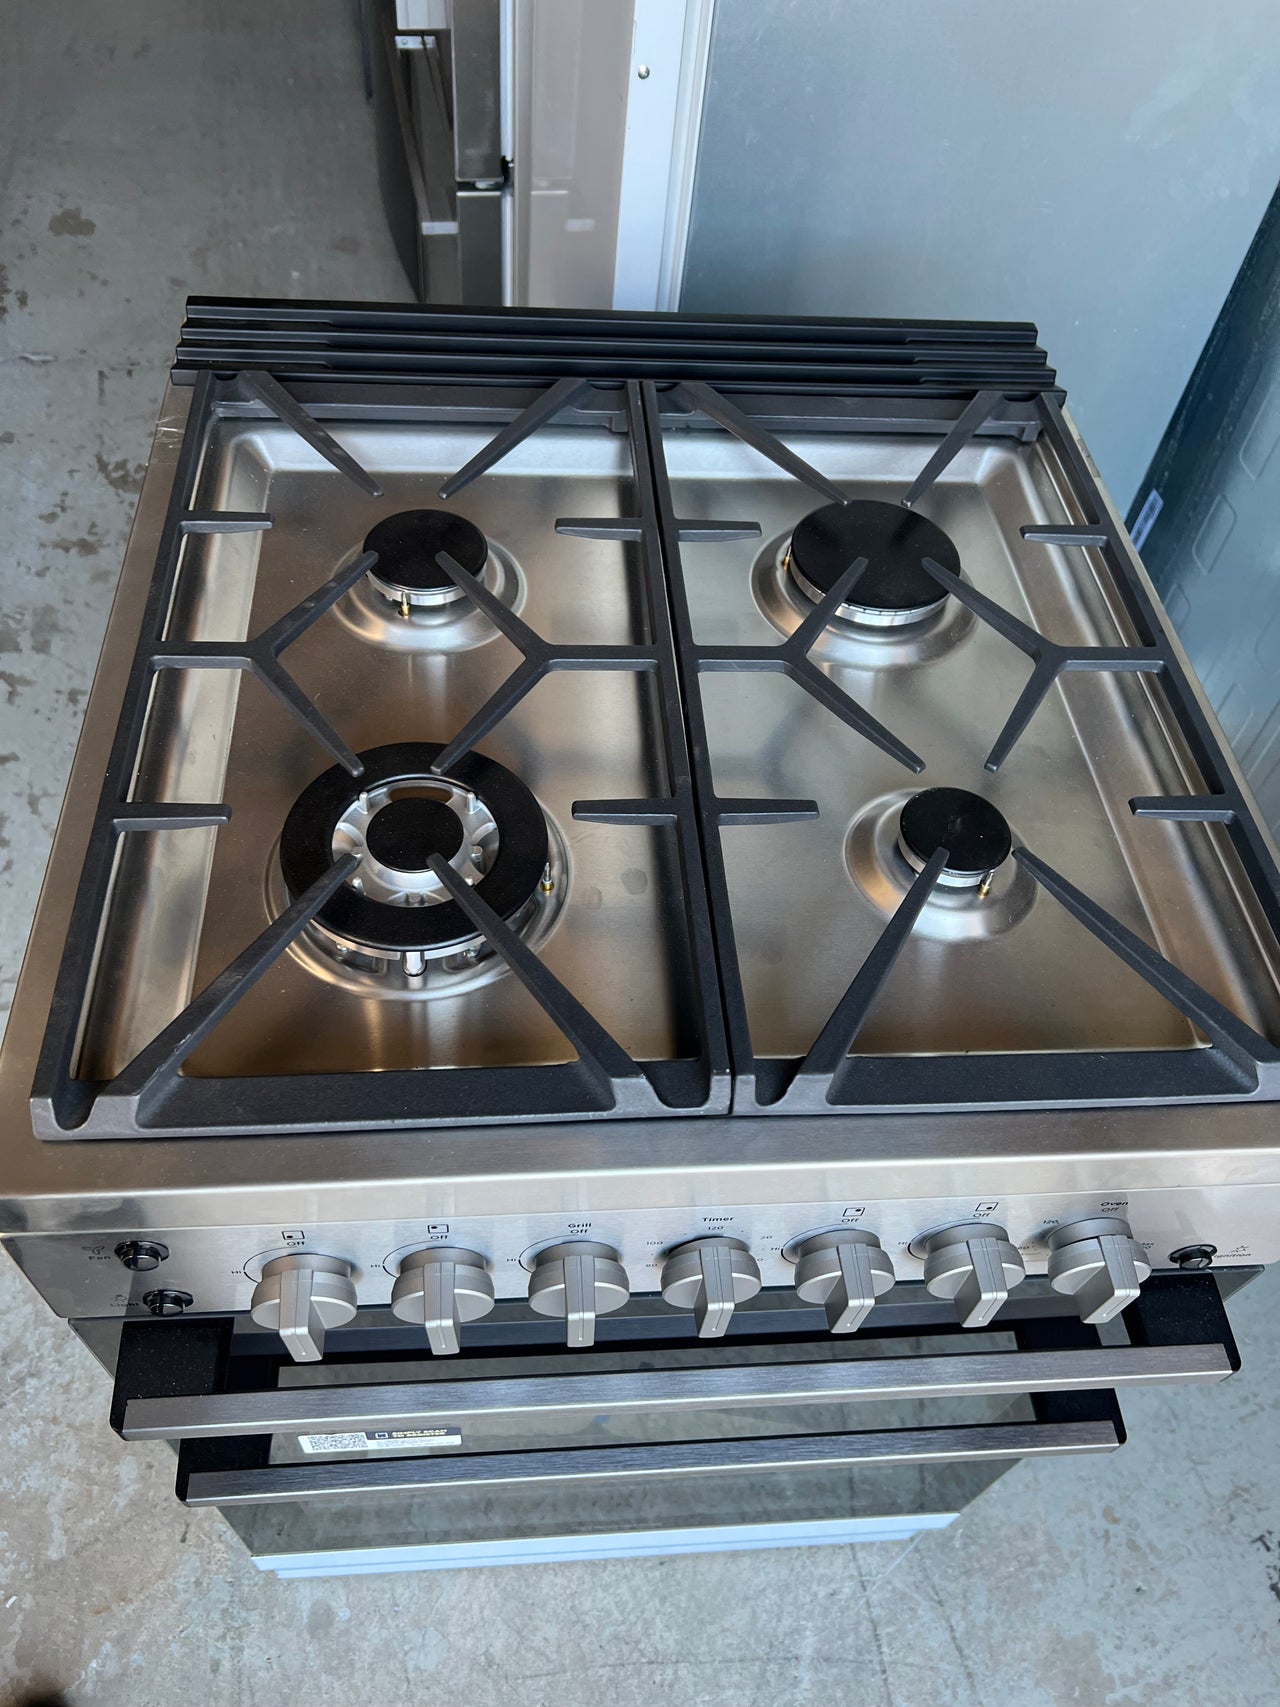 Factory second Westinghouse 60cm Freestanding Natural Gas Oven/Stove WFG612SCNG - Second Hand Appliances Geebung